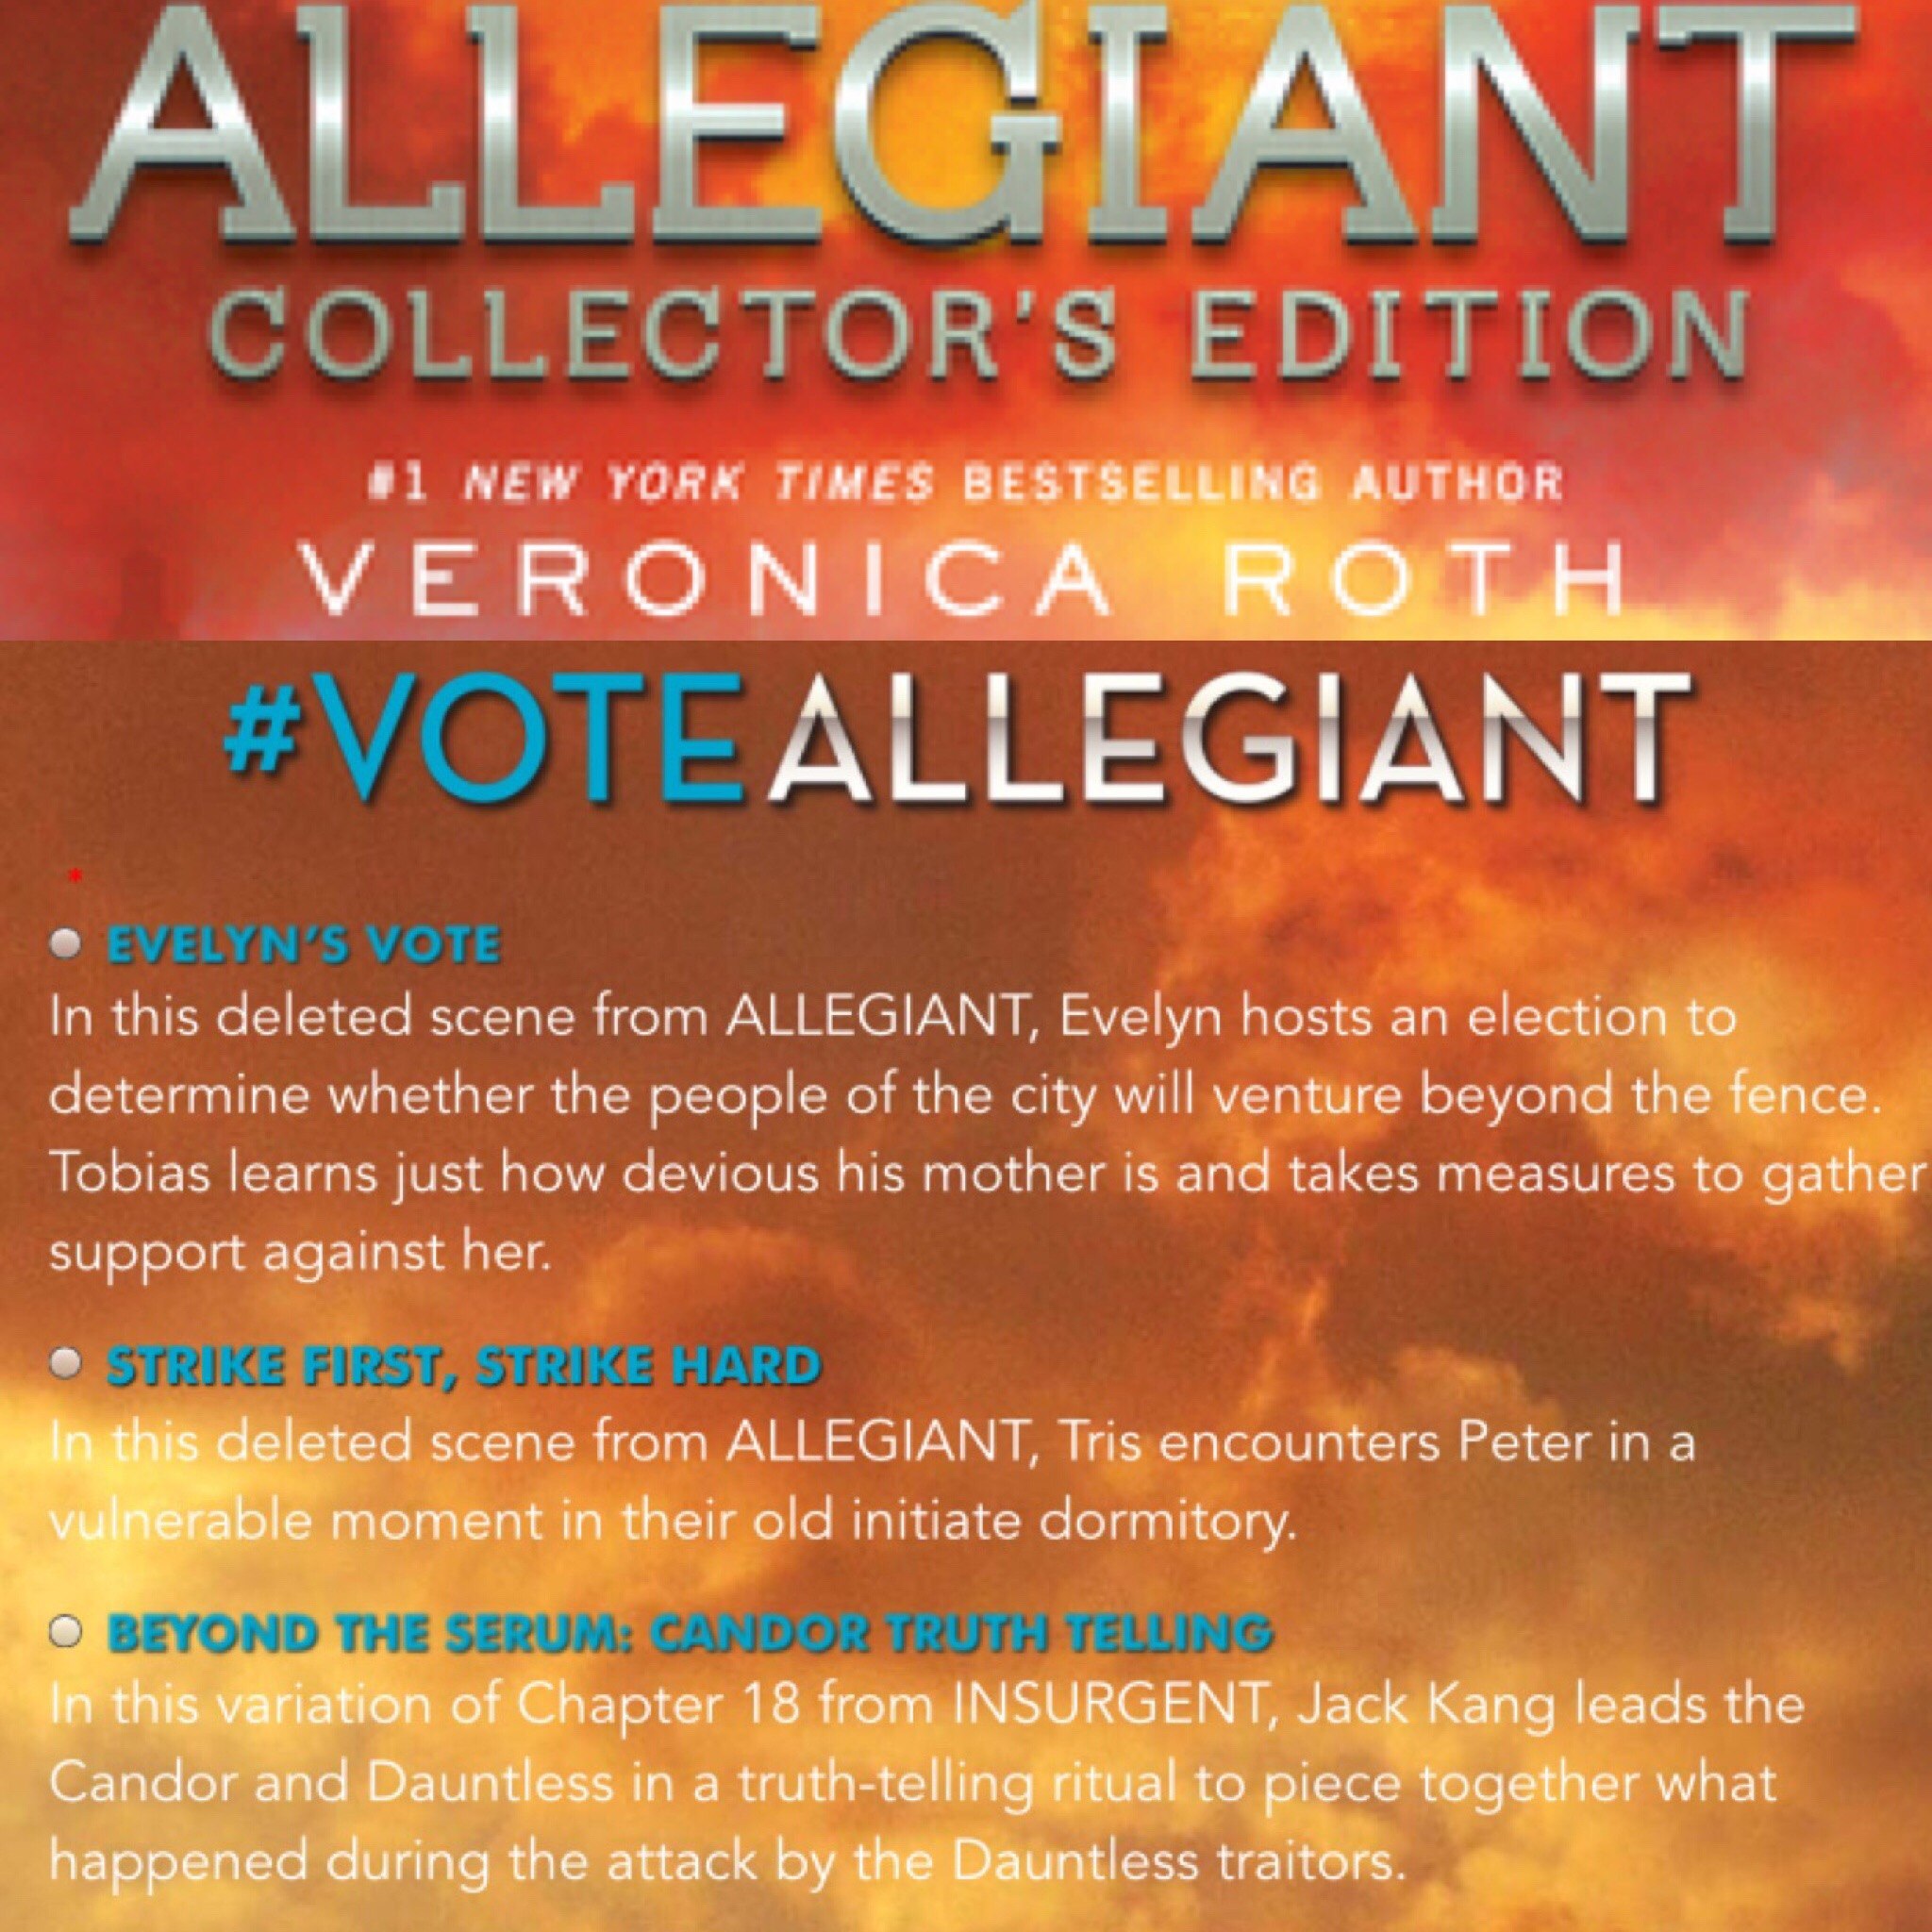 #VoteAllegiant for your Favorite Collector’s Edition Deleted Scene and WIN!